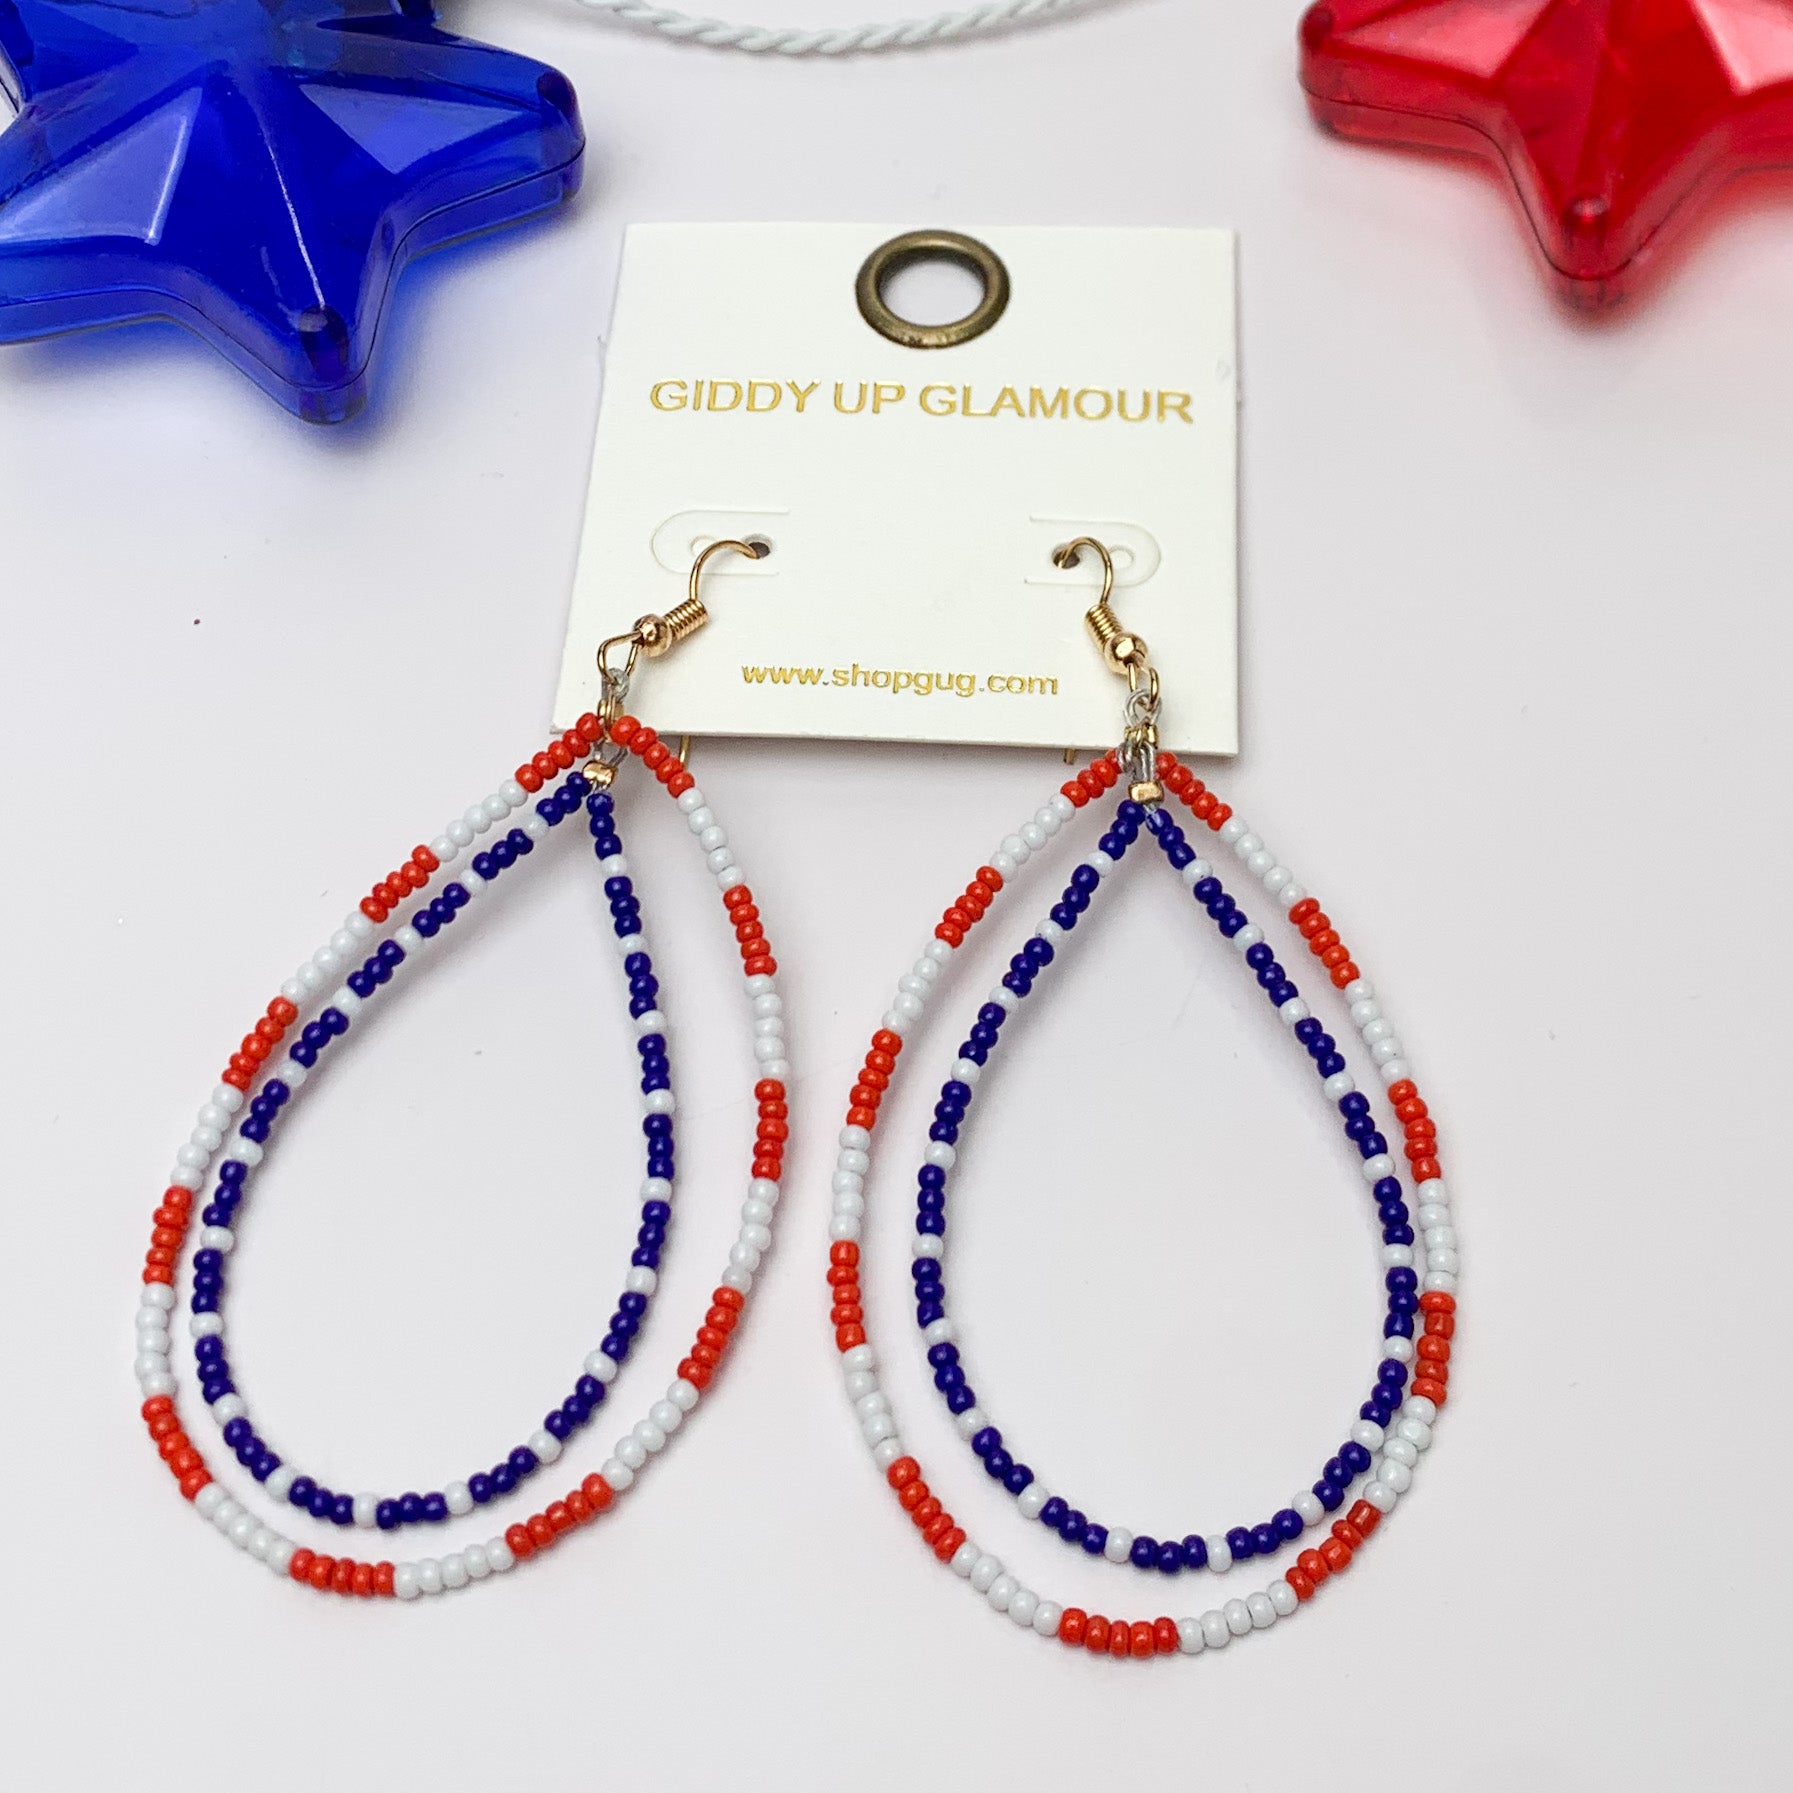 Red, White, and Beads USA Double Open Teardrop Earrings. Pictured on a white background with a blue and red star at the top for decoration.